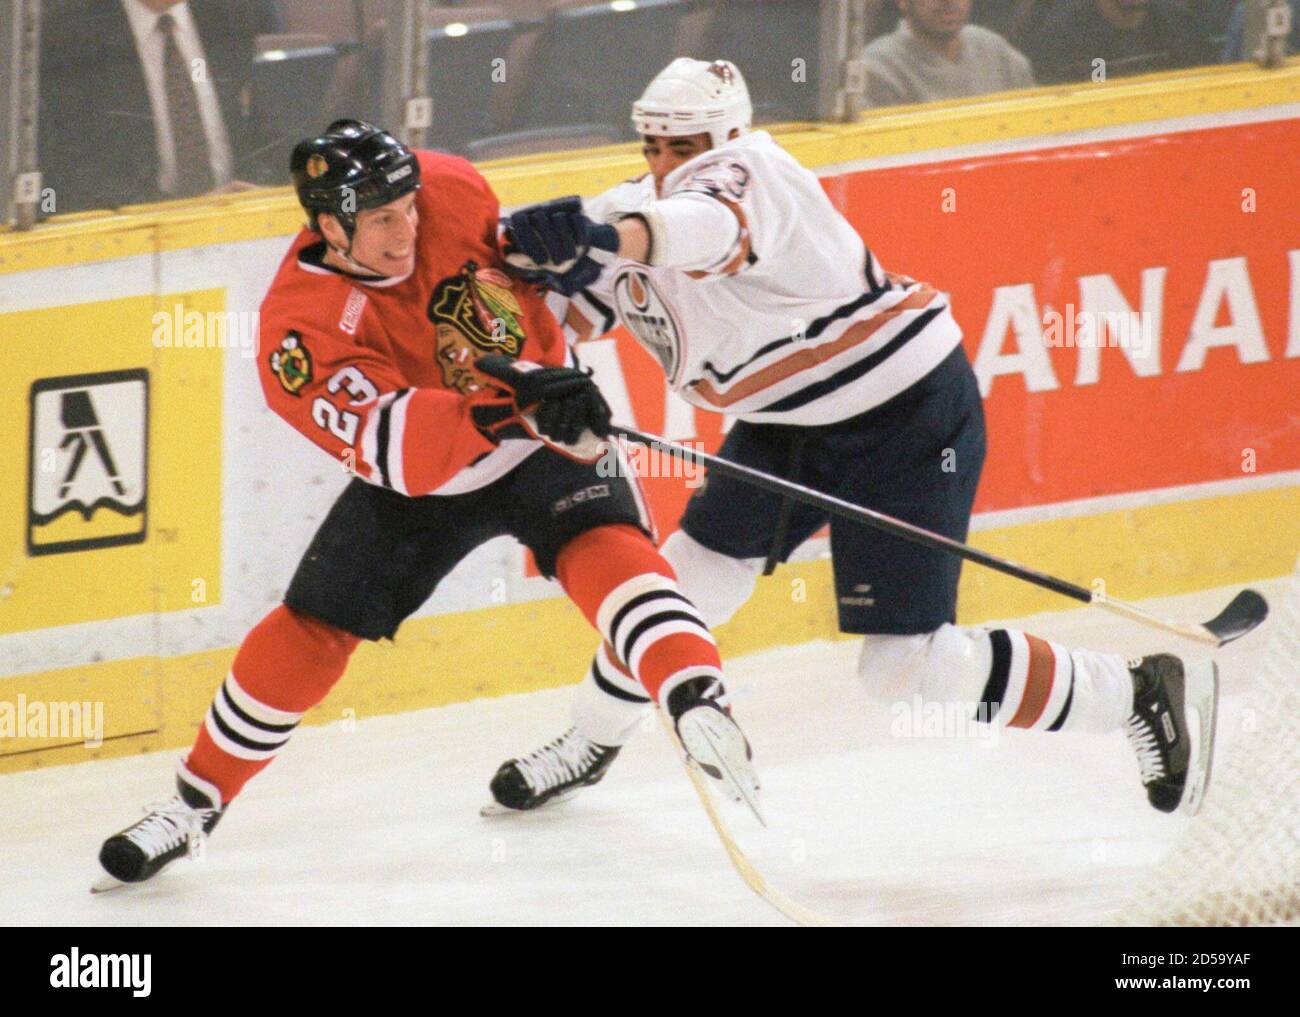 Chicago Blackhawks' Jean-Yves Leroux (23) gets roughed up along the boards by Edmonton Oilers' Sean Brown during first period action at the Skyreach Center in Edmonton Februry 2.  PB/SV Stock Photo